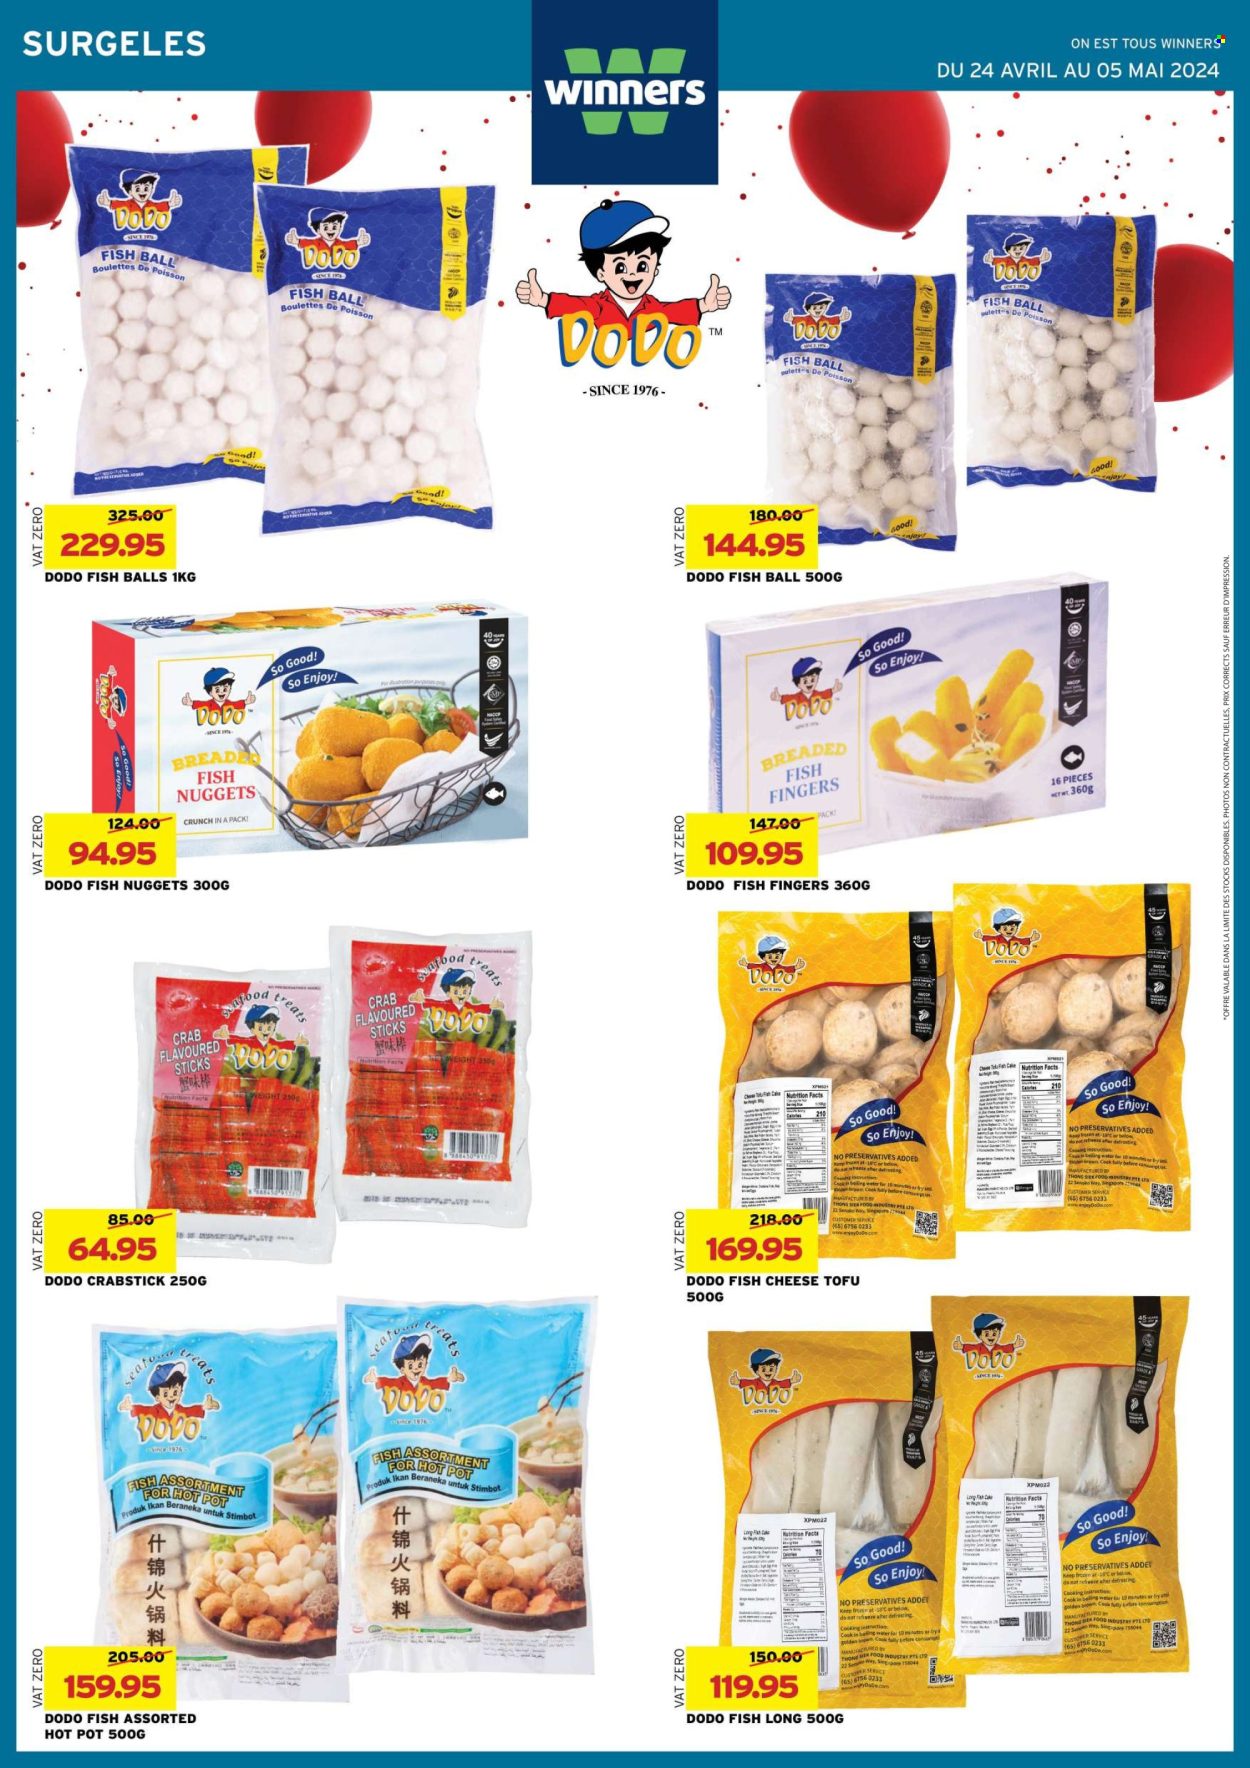 thumbnail - Winner's Catalogue - 24.04.2024 - 5.05.2024 - Sales products - cake, seafood, crab, fish nuggets, fish fingers, breaded fish, tofu, fish cake, water, pot. Page 20.